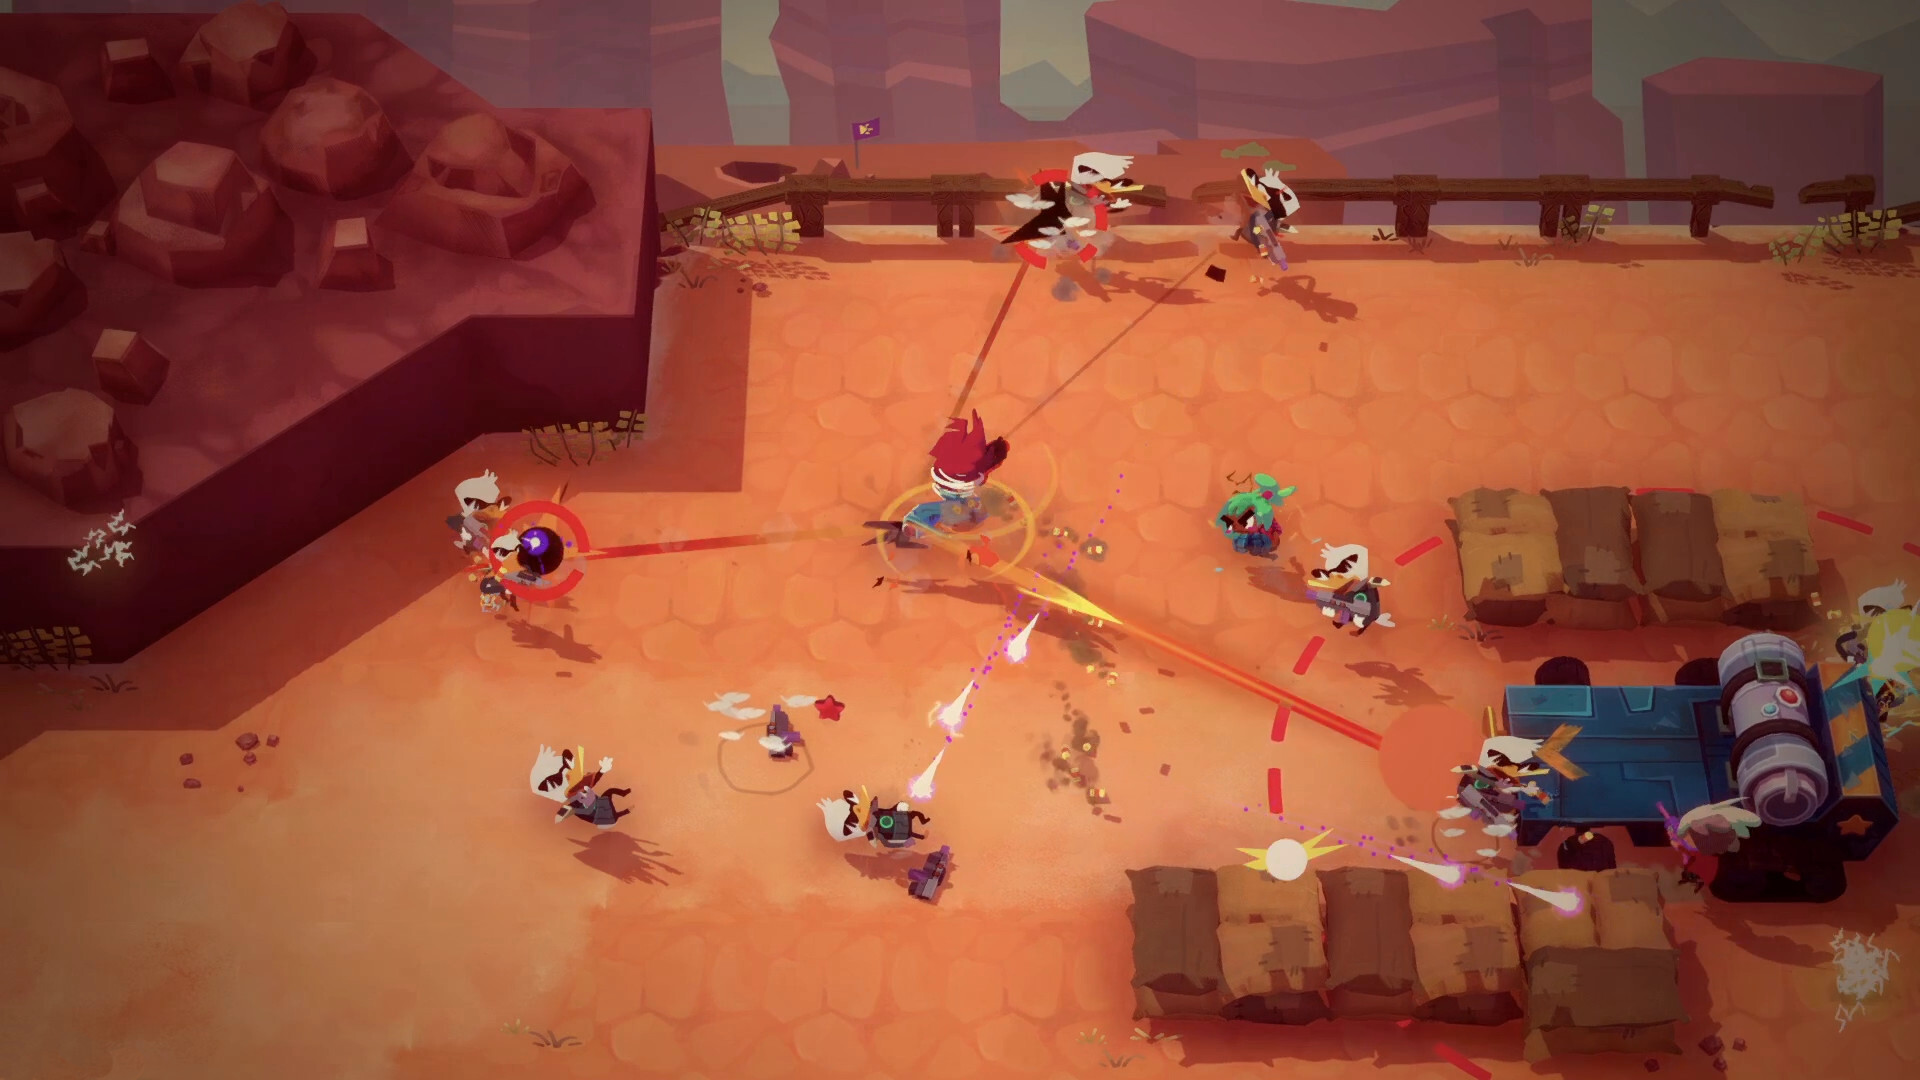 Gearbox to publish Rogue Snail's online co-op looter shooter Relic